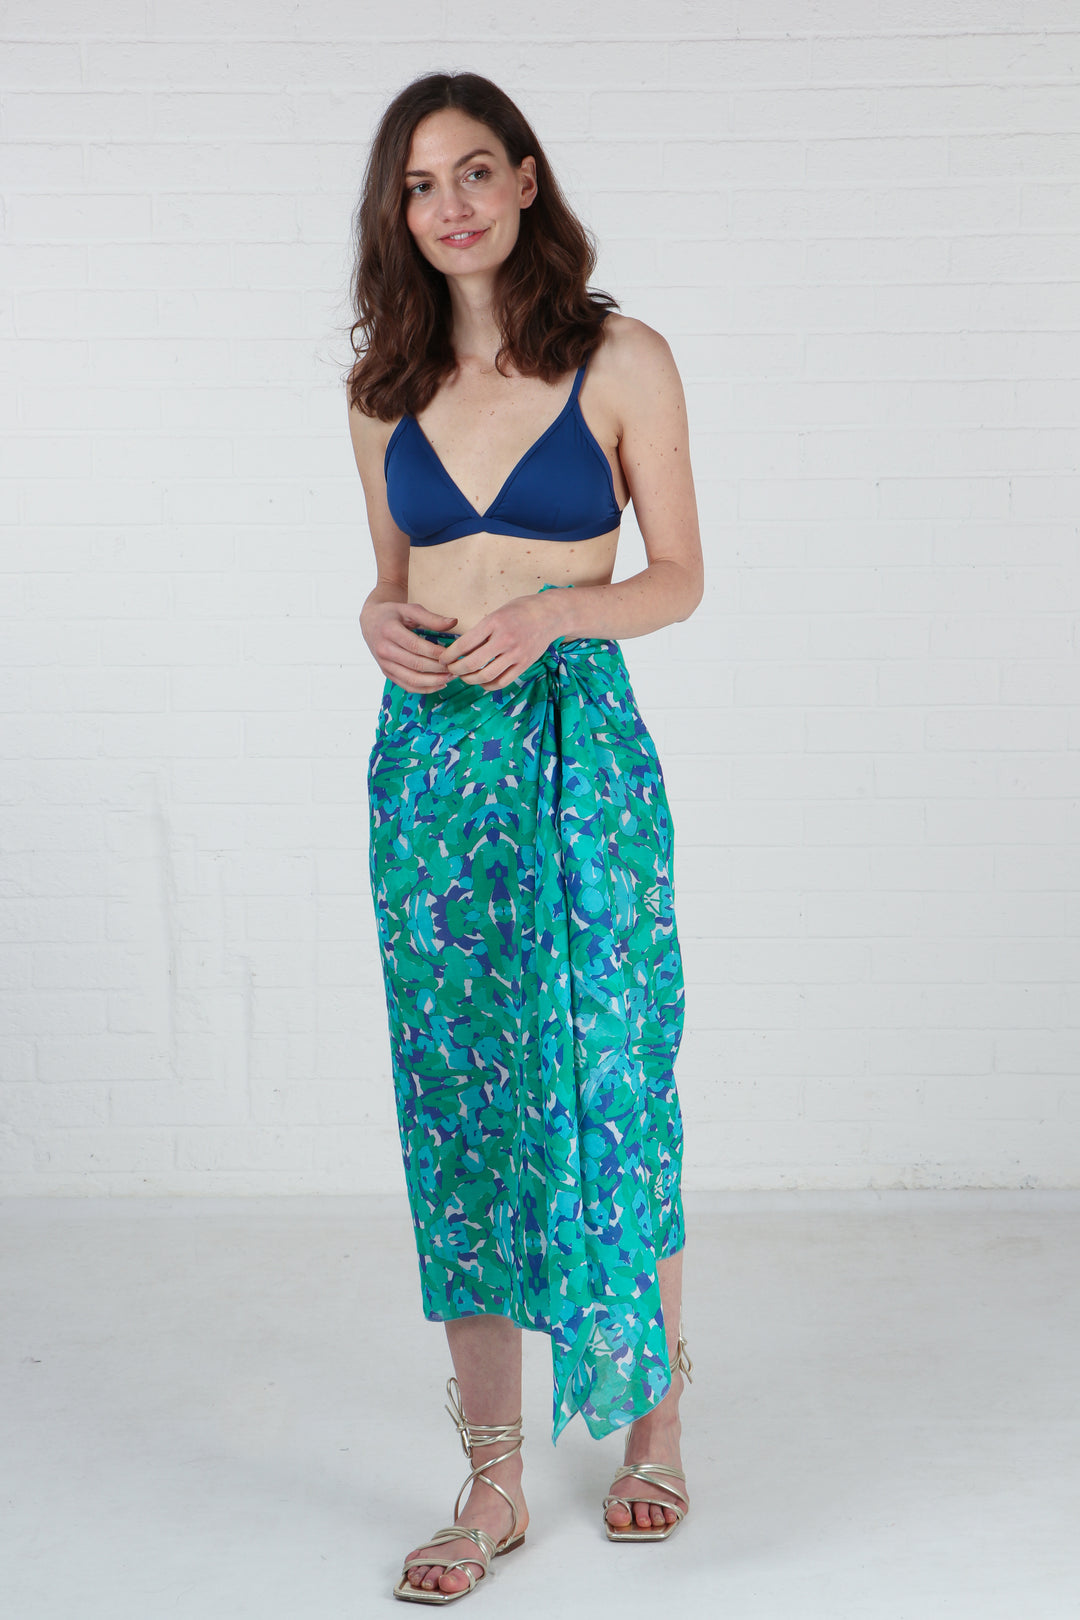 model wearing this green scarf as a beach cover up sarong